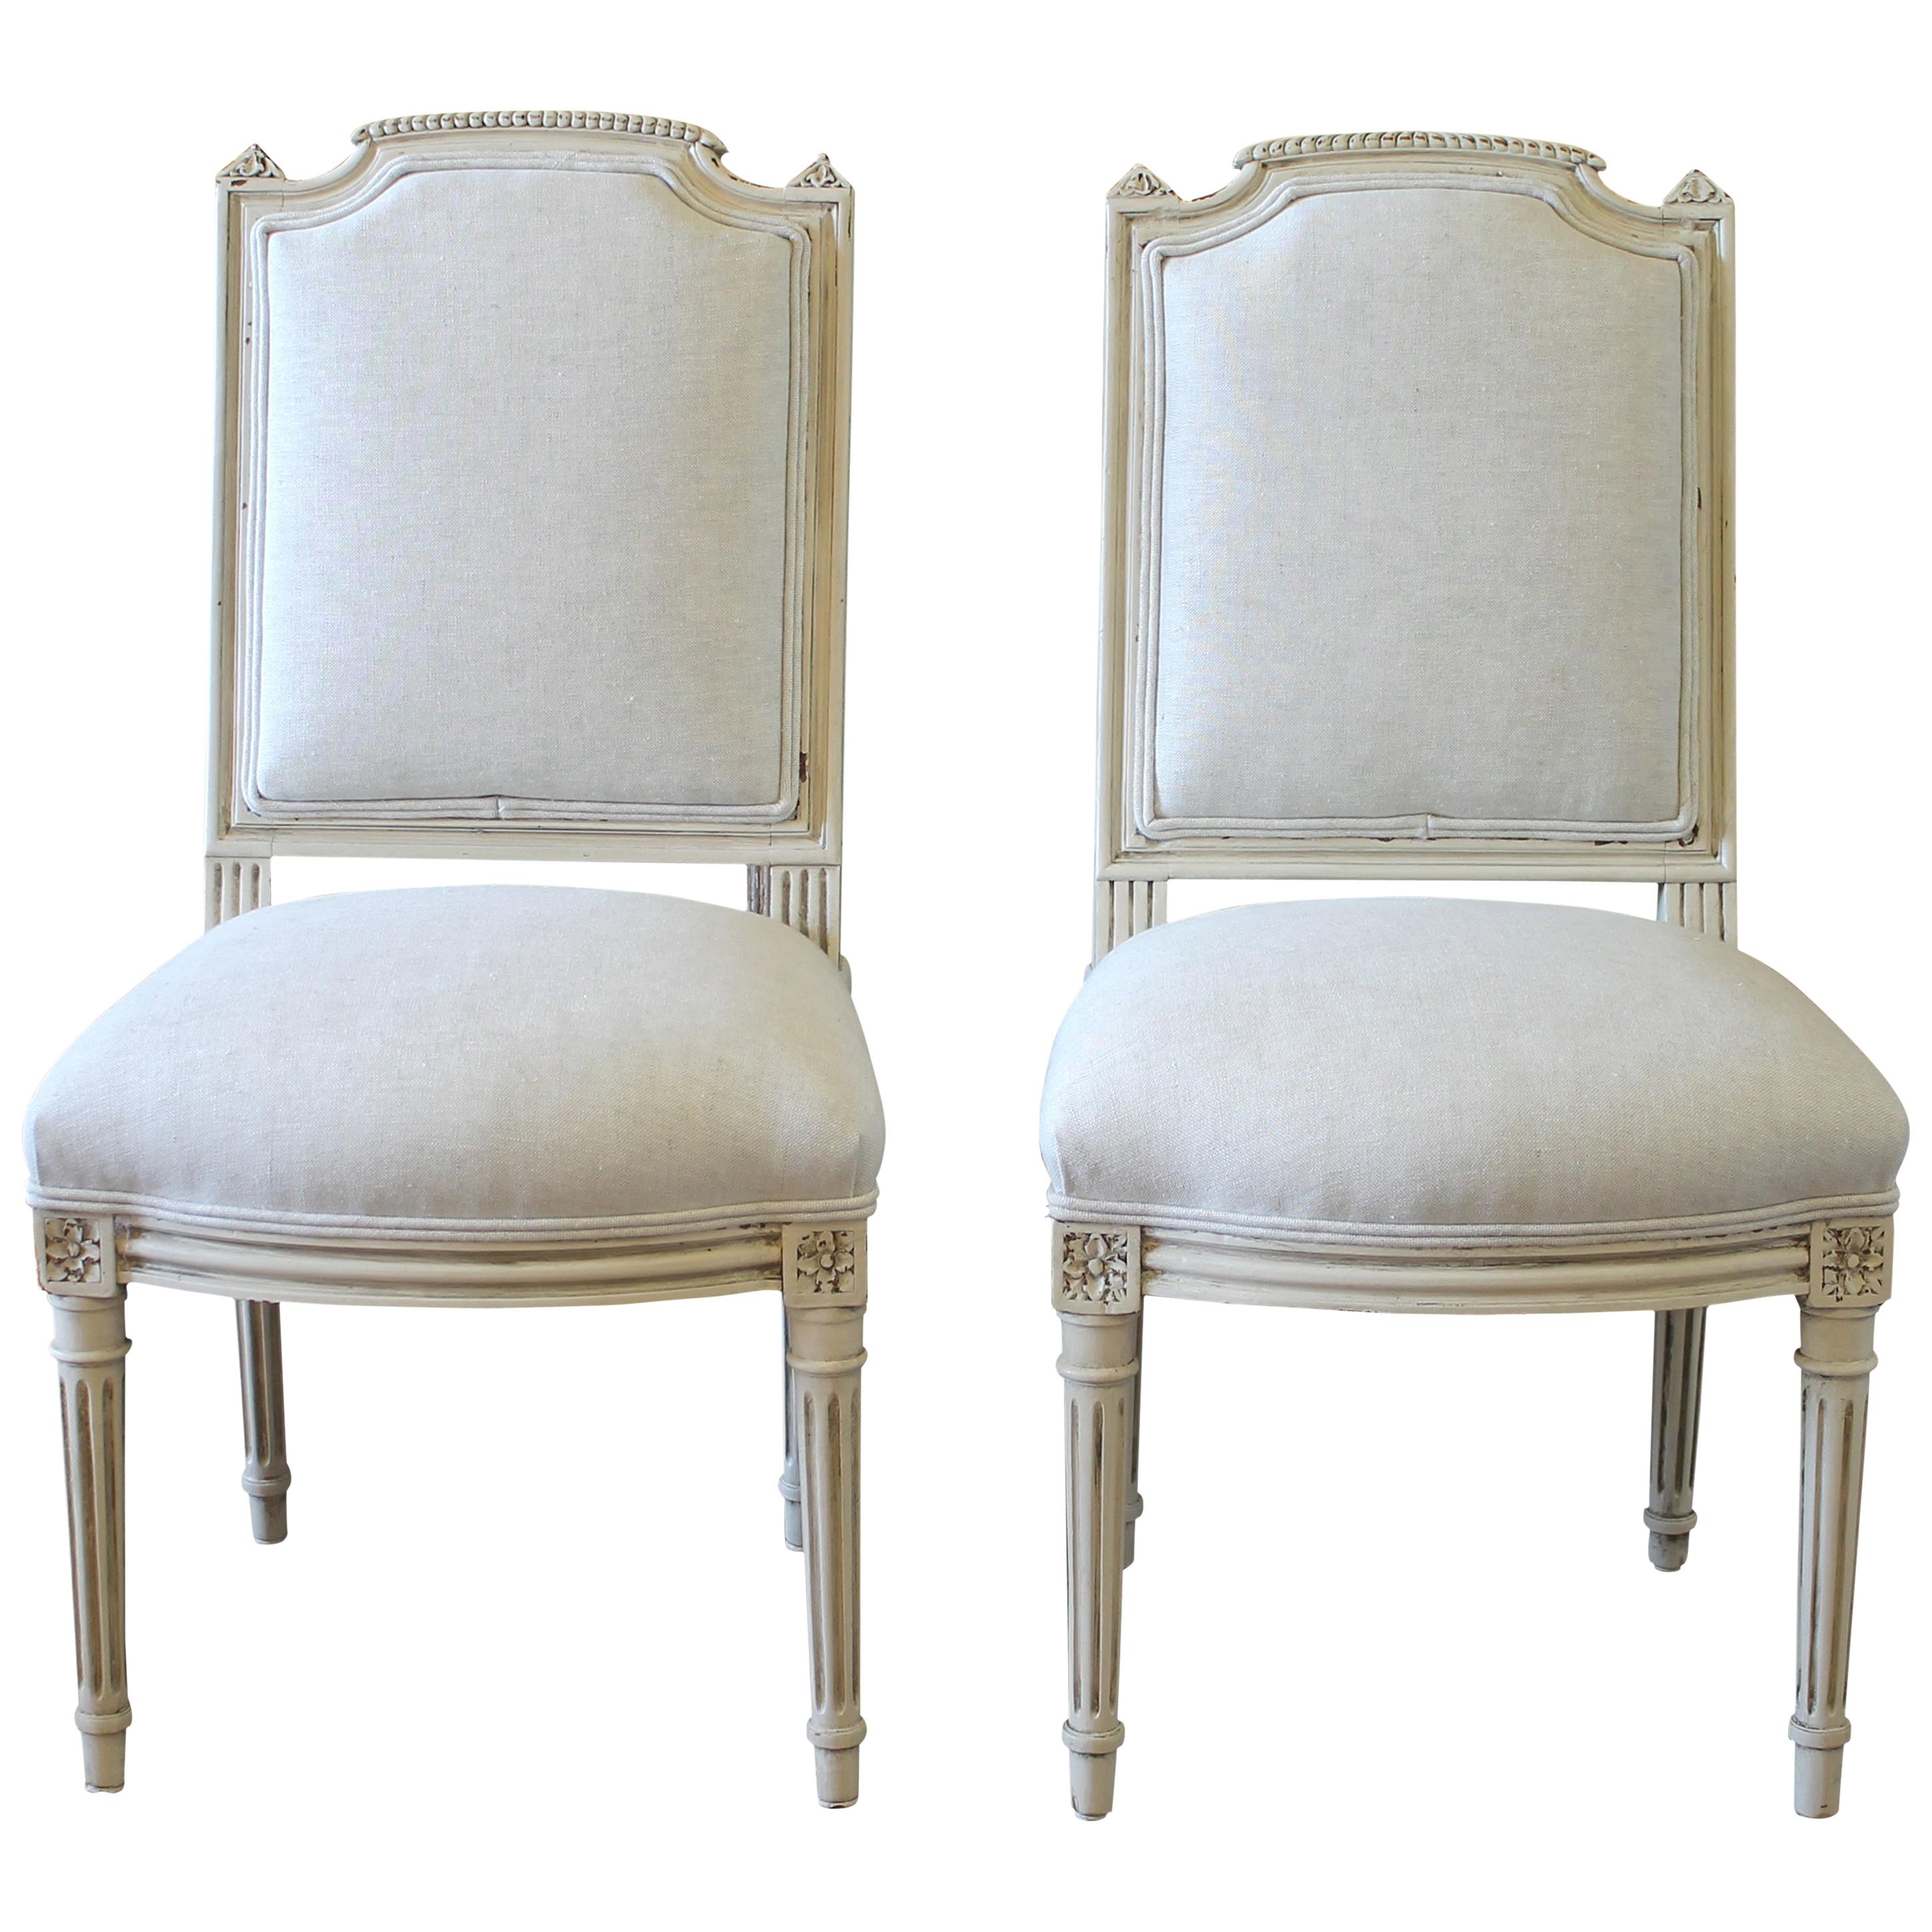 Early 20th Century Pair of Painted and Upholstered Louis XVI Style Childs Chairs